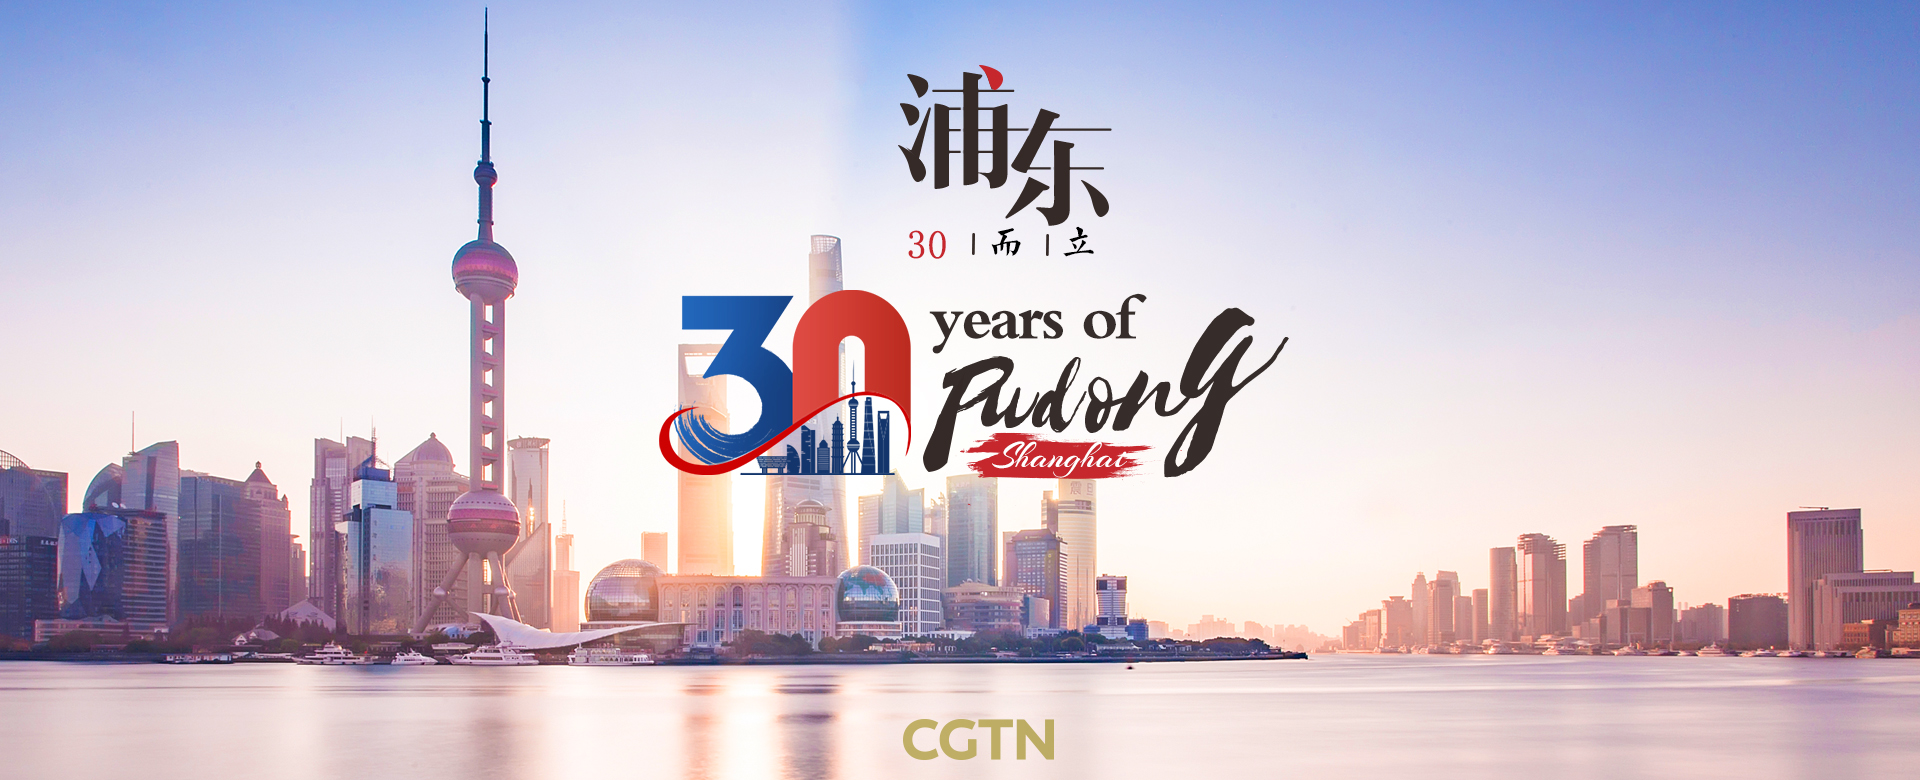 30 Years of Pudong, Shanghai